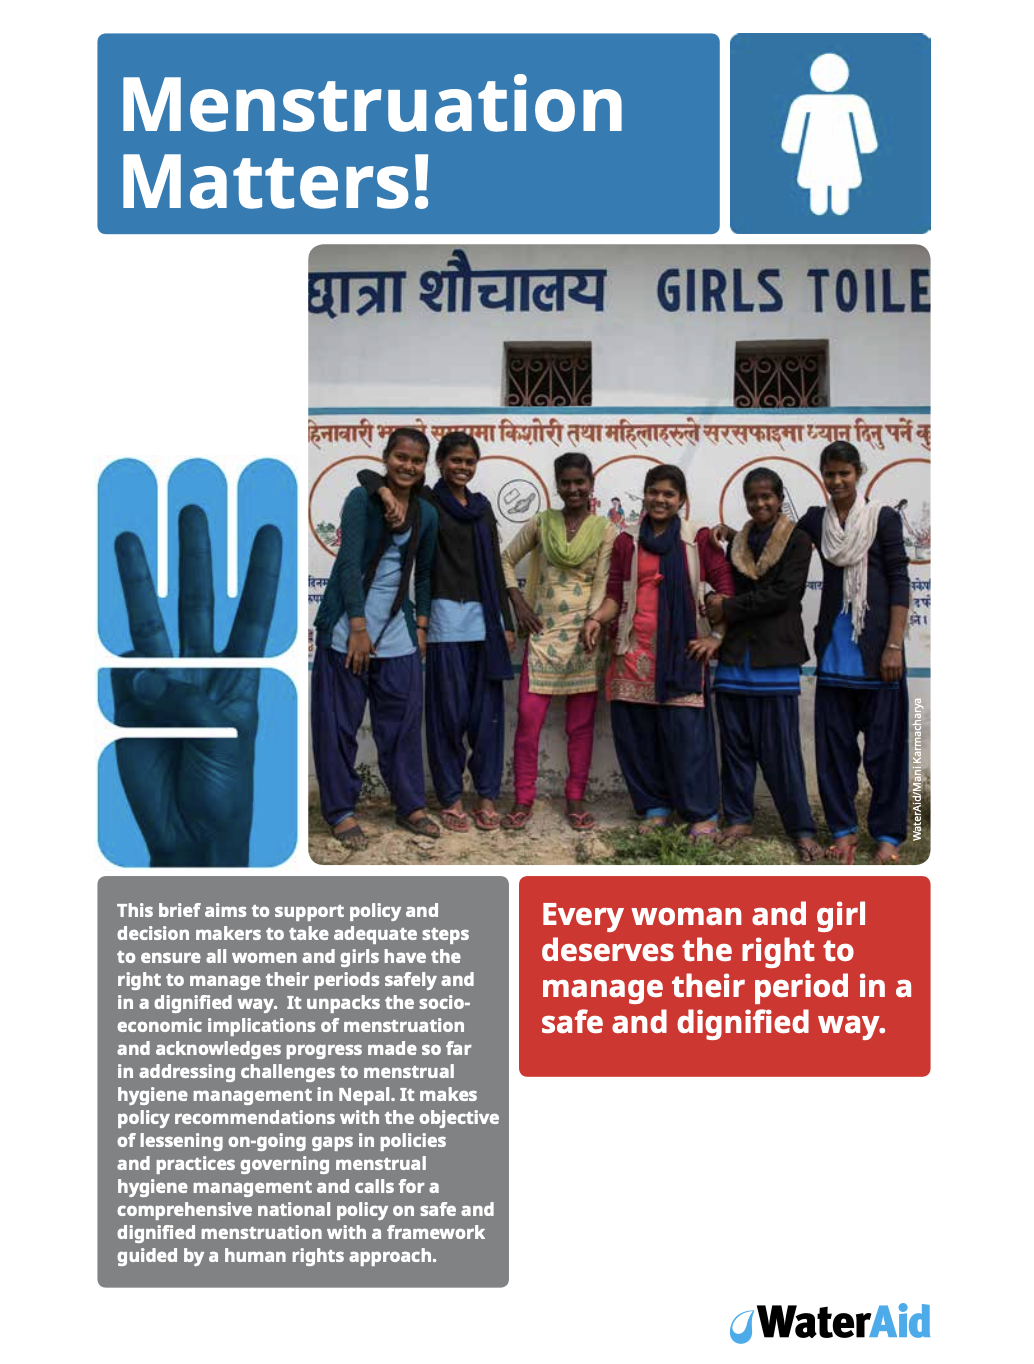 WaterAid's Policy Brief on Menstruation Matters